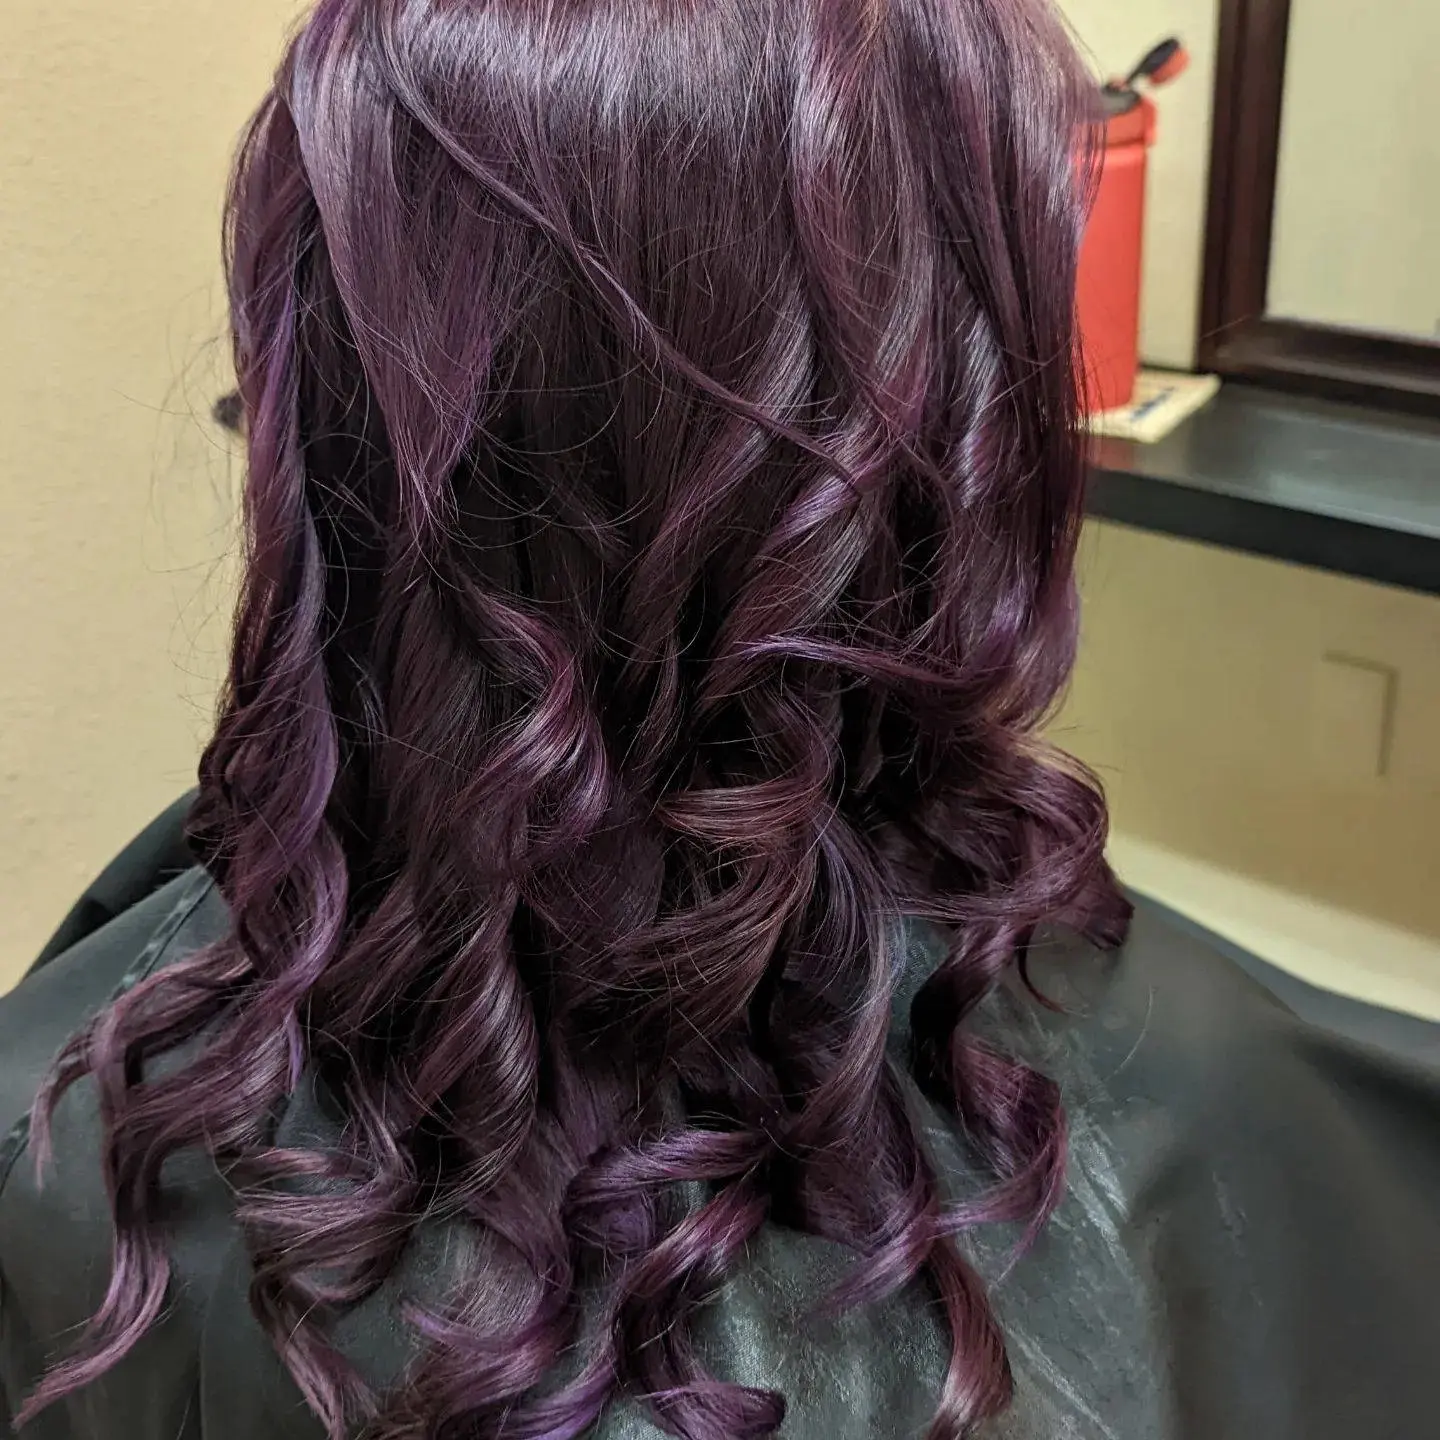 Image of balayage hair color repaired at a hair salon in Redmond Oregon